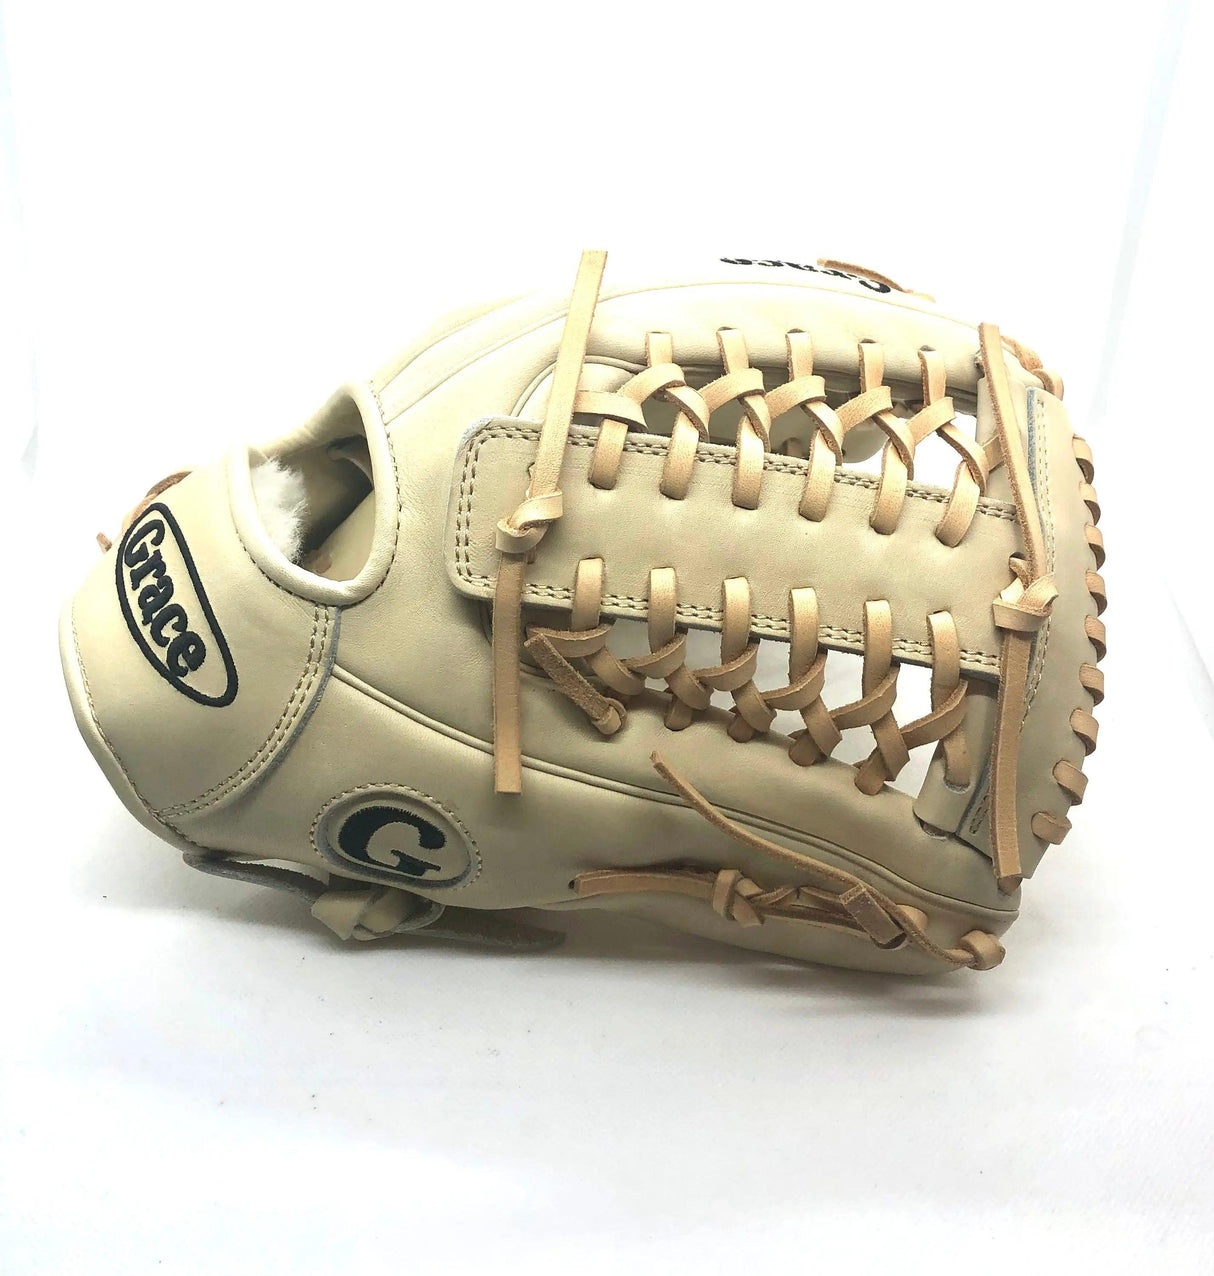 Grace Glove Co 12" In Blonde Fielding Pitching Modified Trapeze Web Glove - CustomBallgloves.com